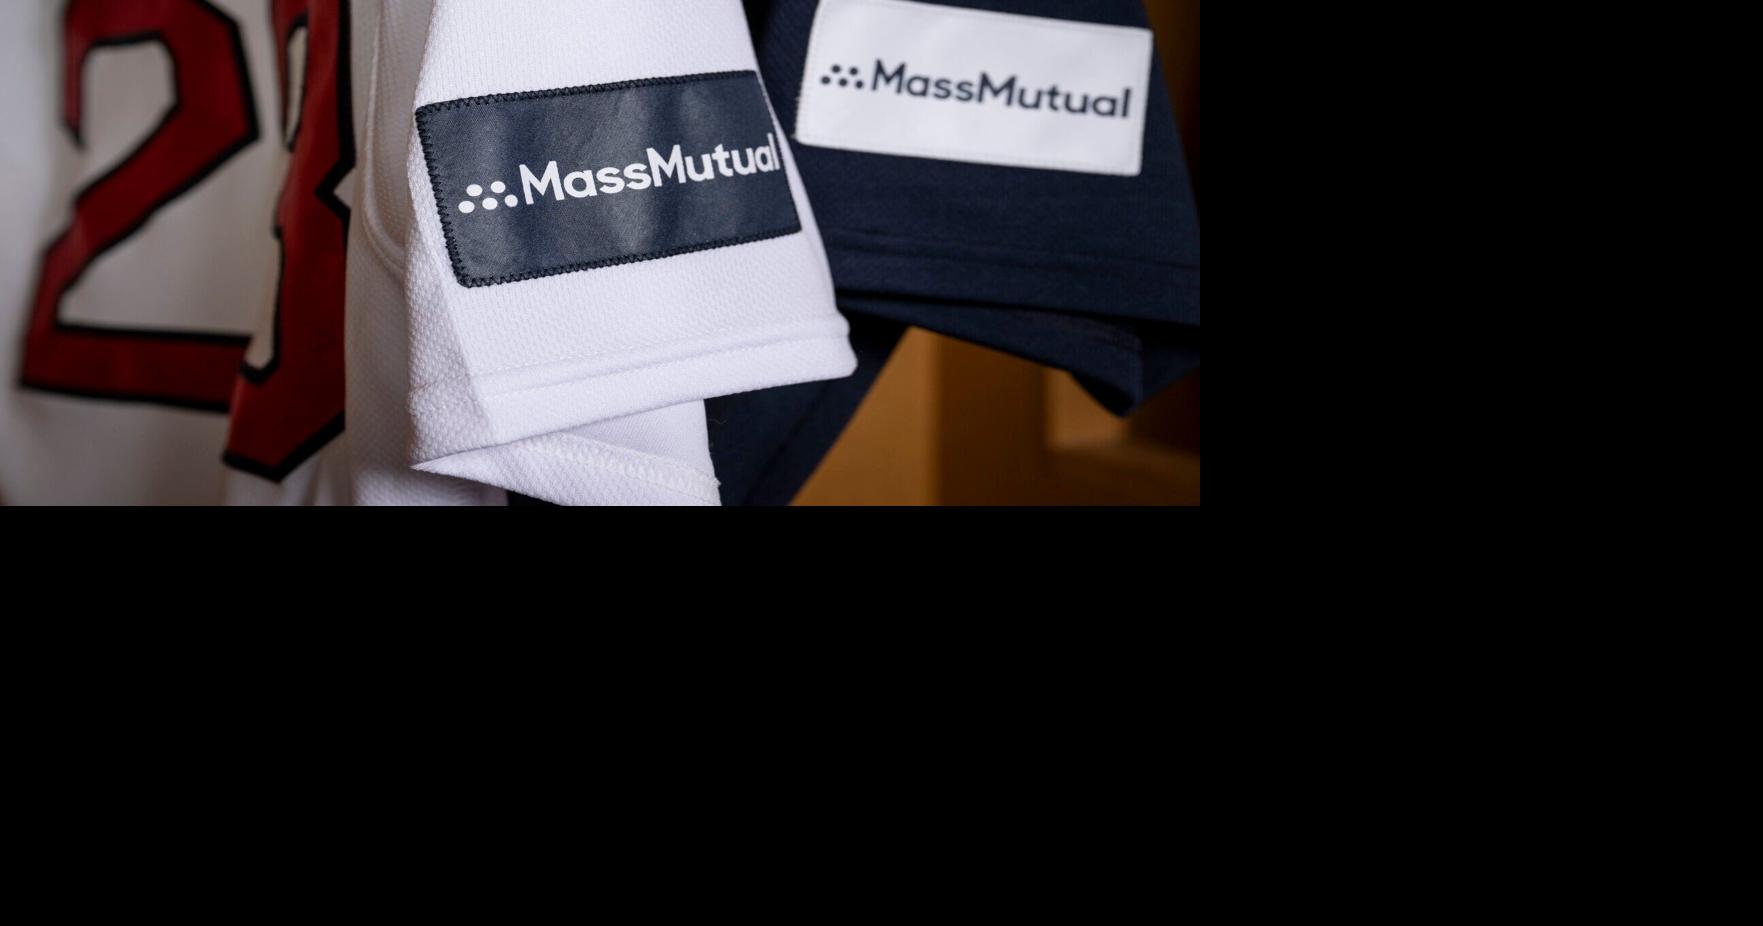 Boston Red Sox Announce MassMutual Patch on Jerseys Starting in 2023 –  SportsLogos.Net News